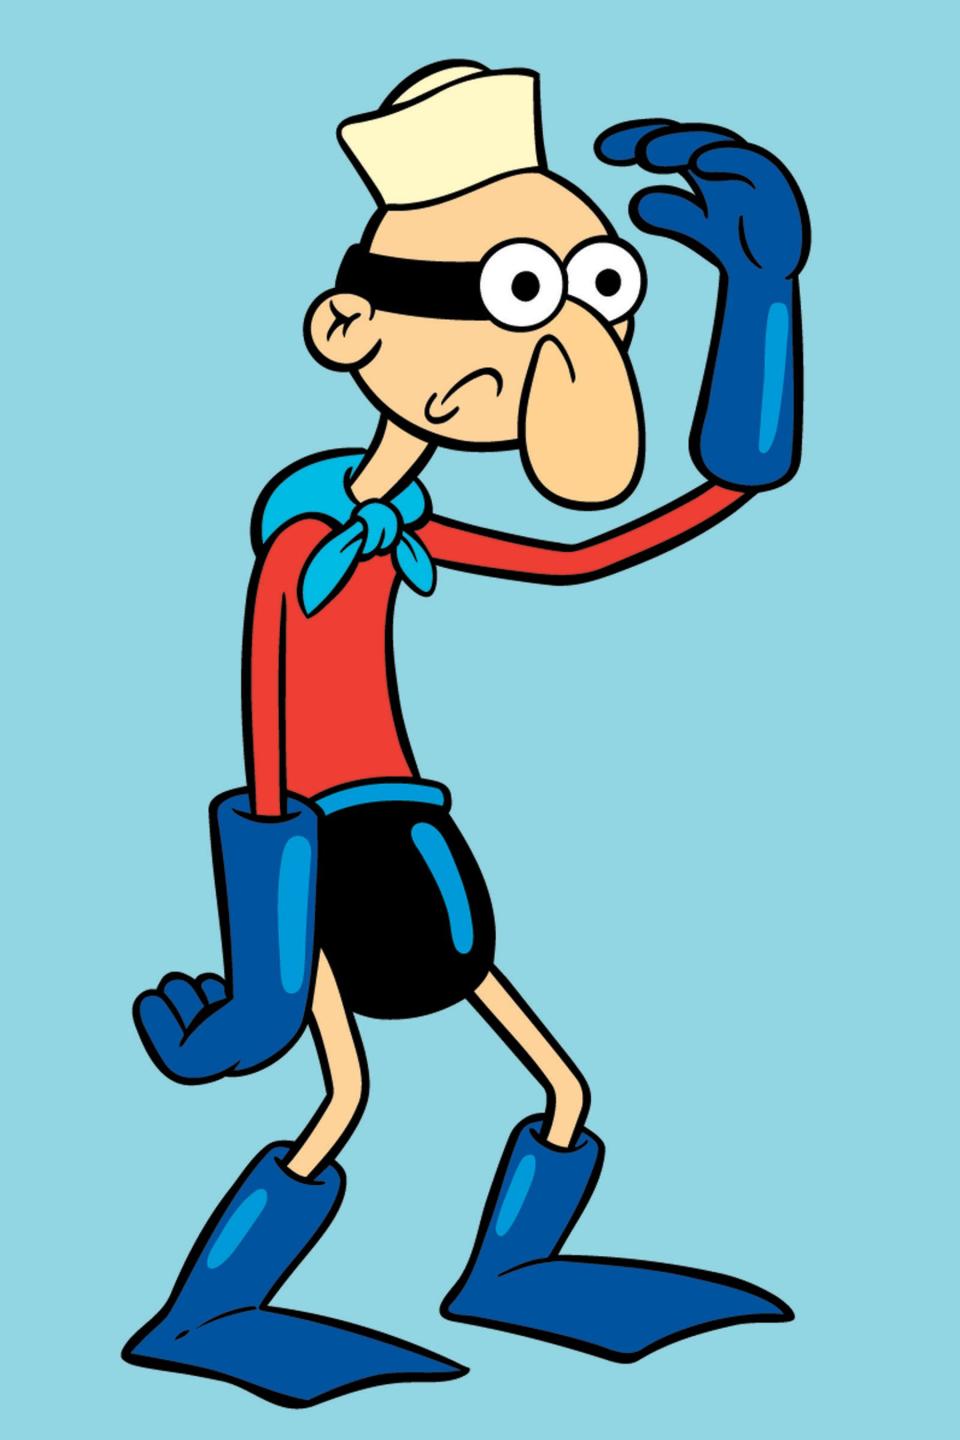 Behind the scenes, Conway did quite a bit of voice work, including as Barnacle Boy on <em>SpongeBob SquarePants. </em>